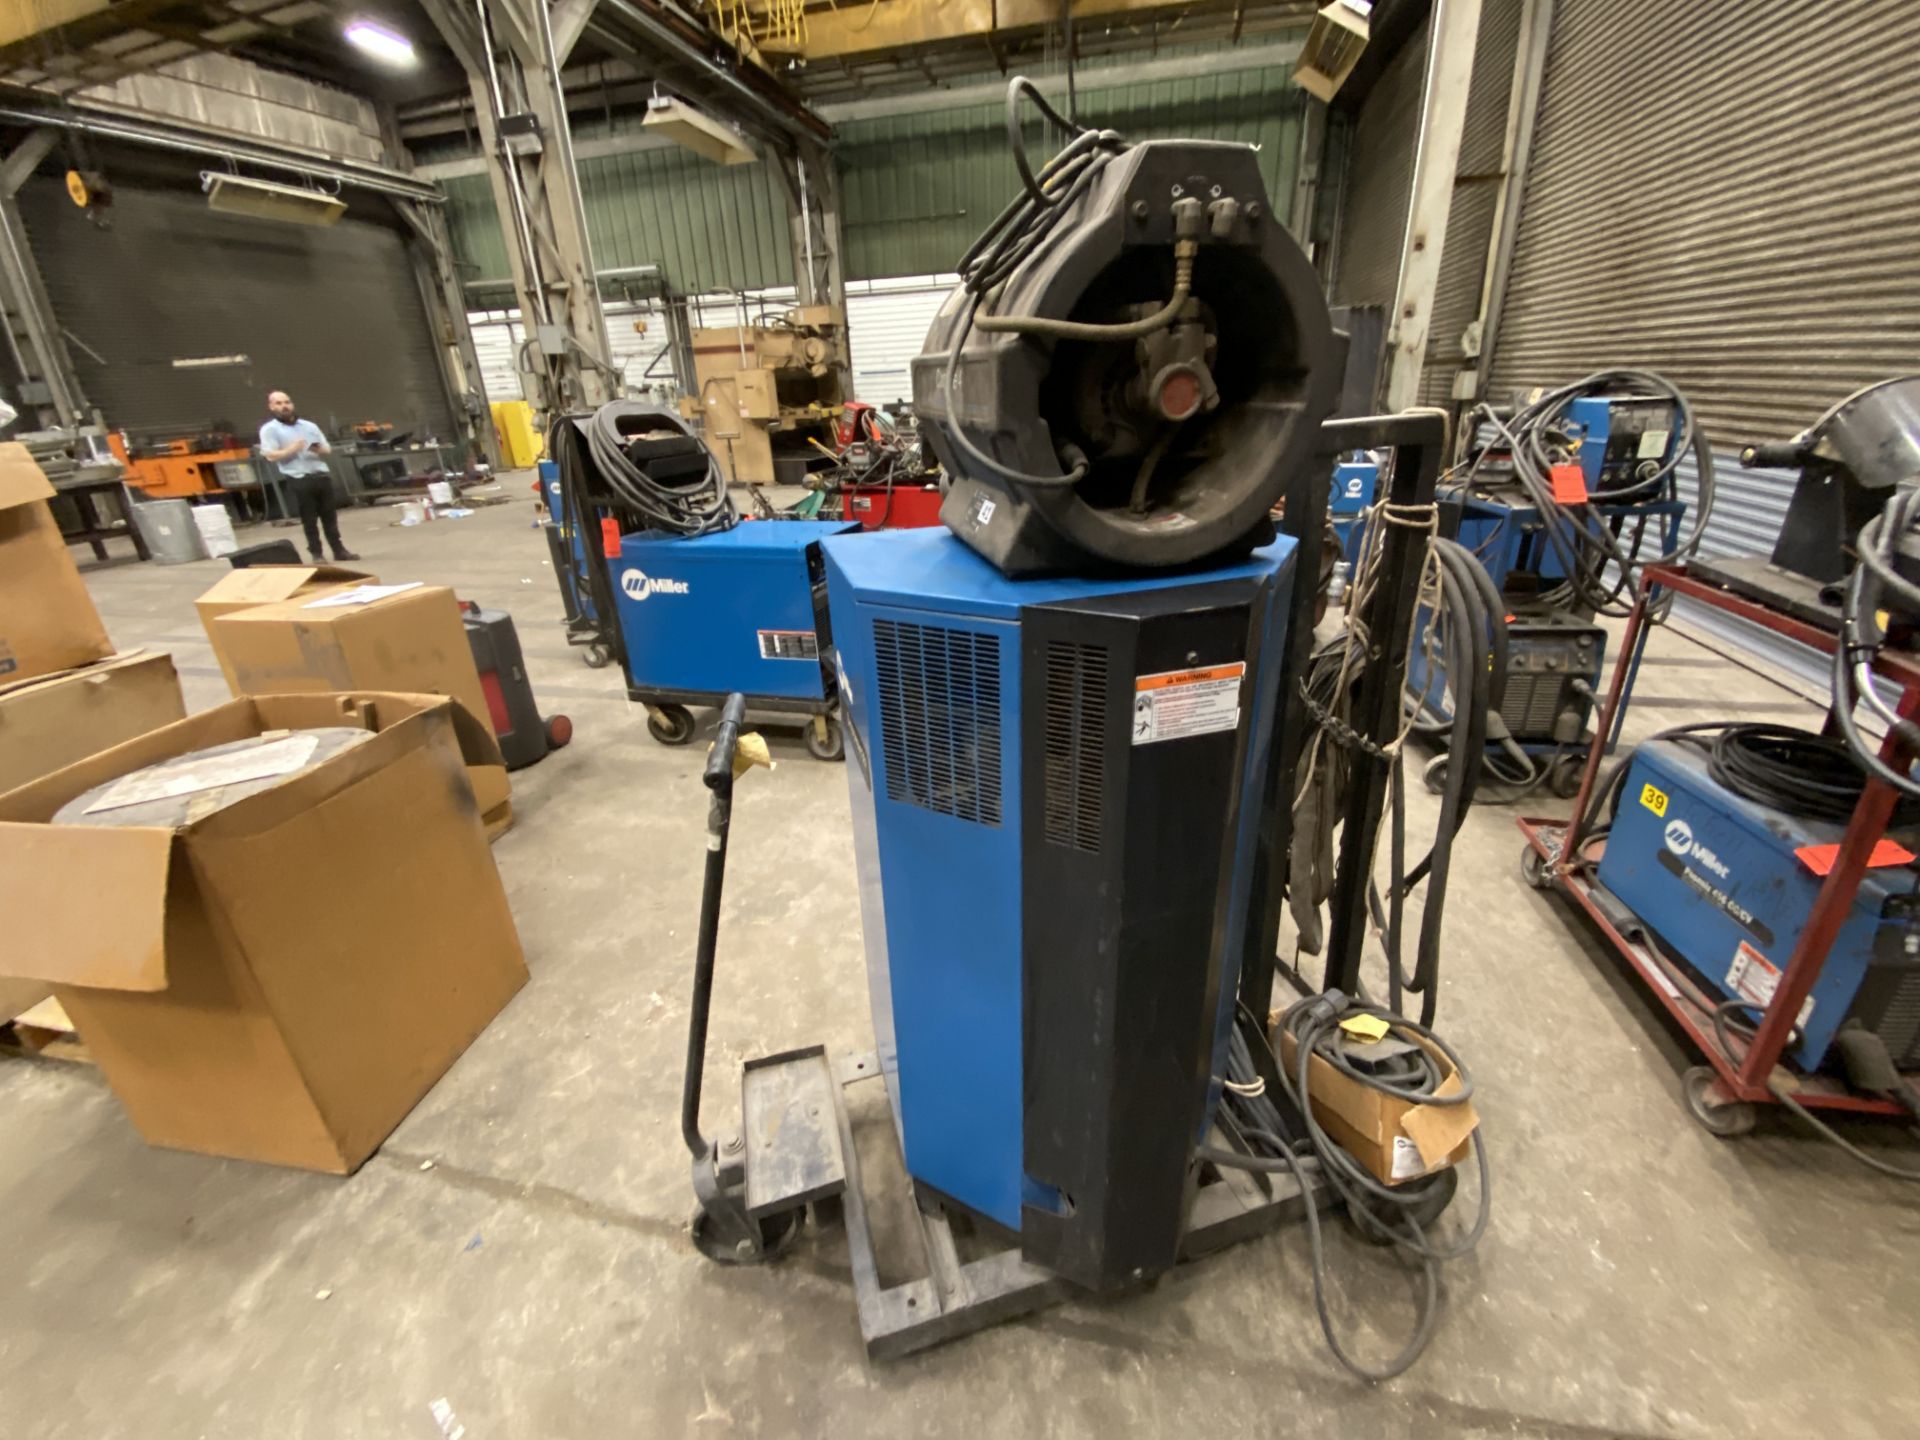 Miller synchrowave 351 CC ac/DC arc welder SN KH316086 with Coolmate 4 water chiller with foot - Image 3 of 4